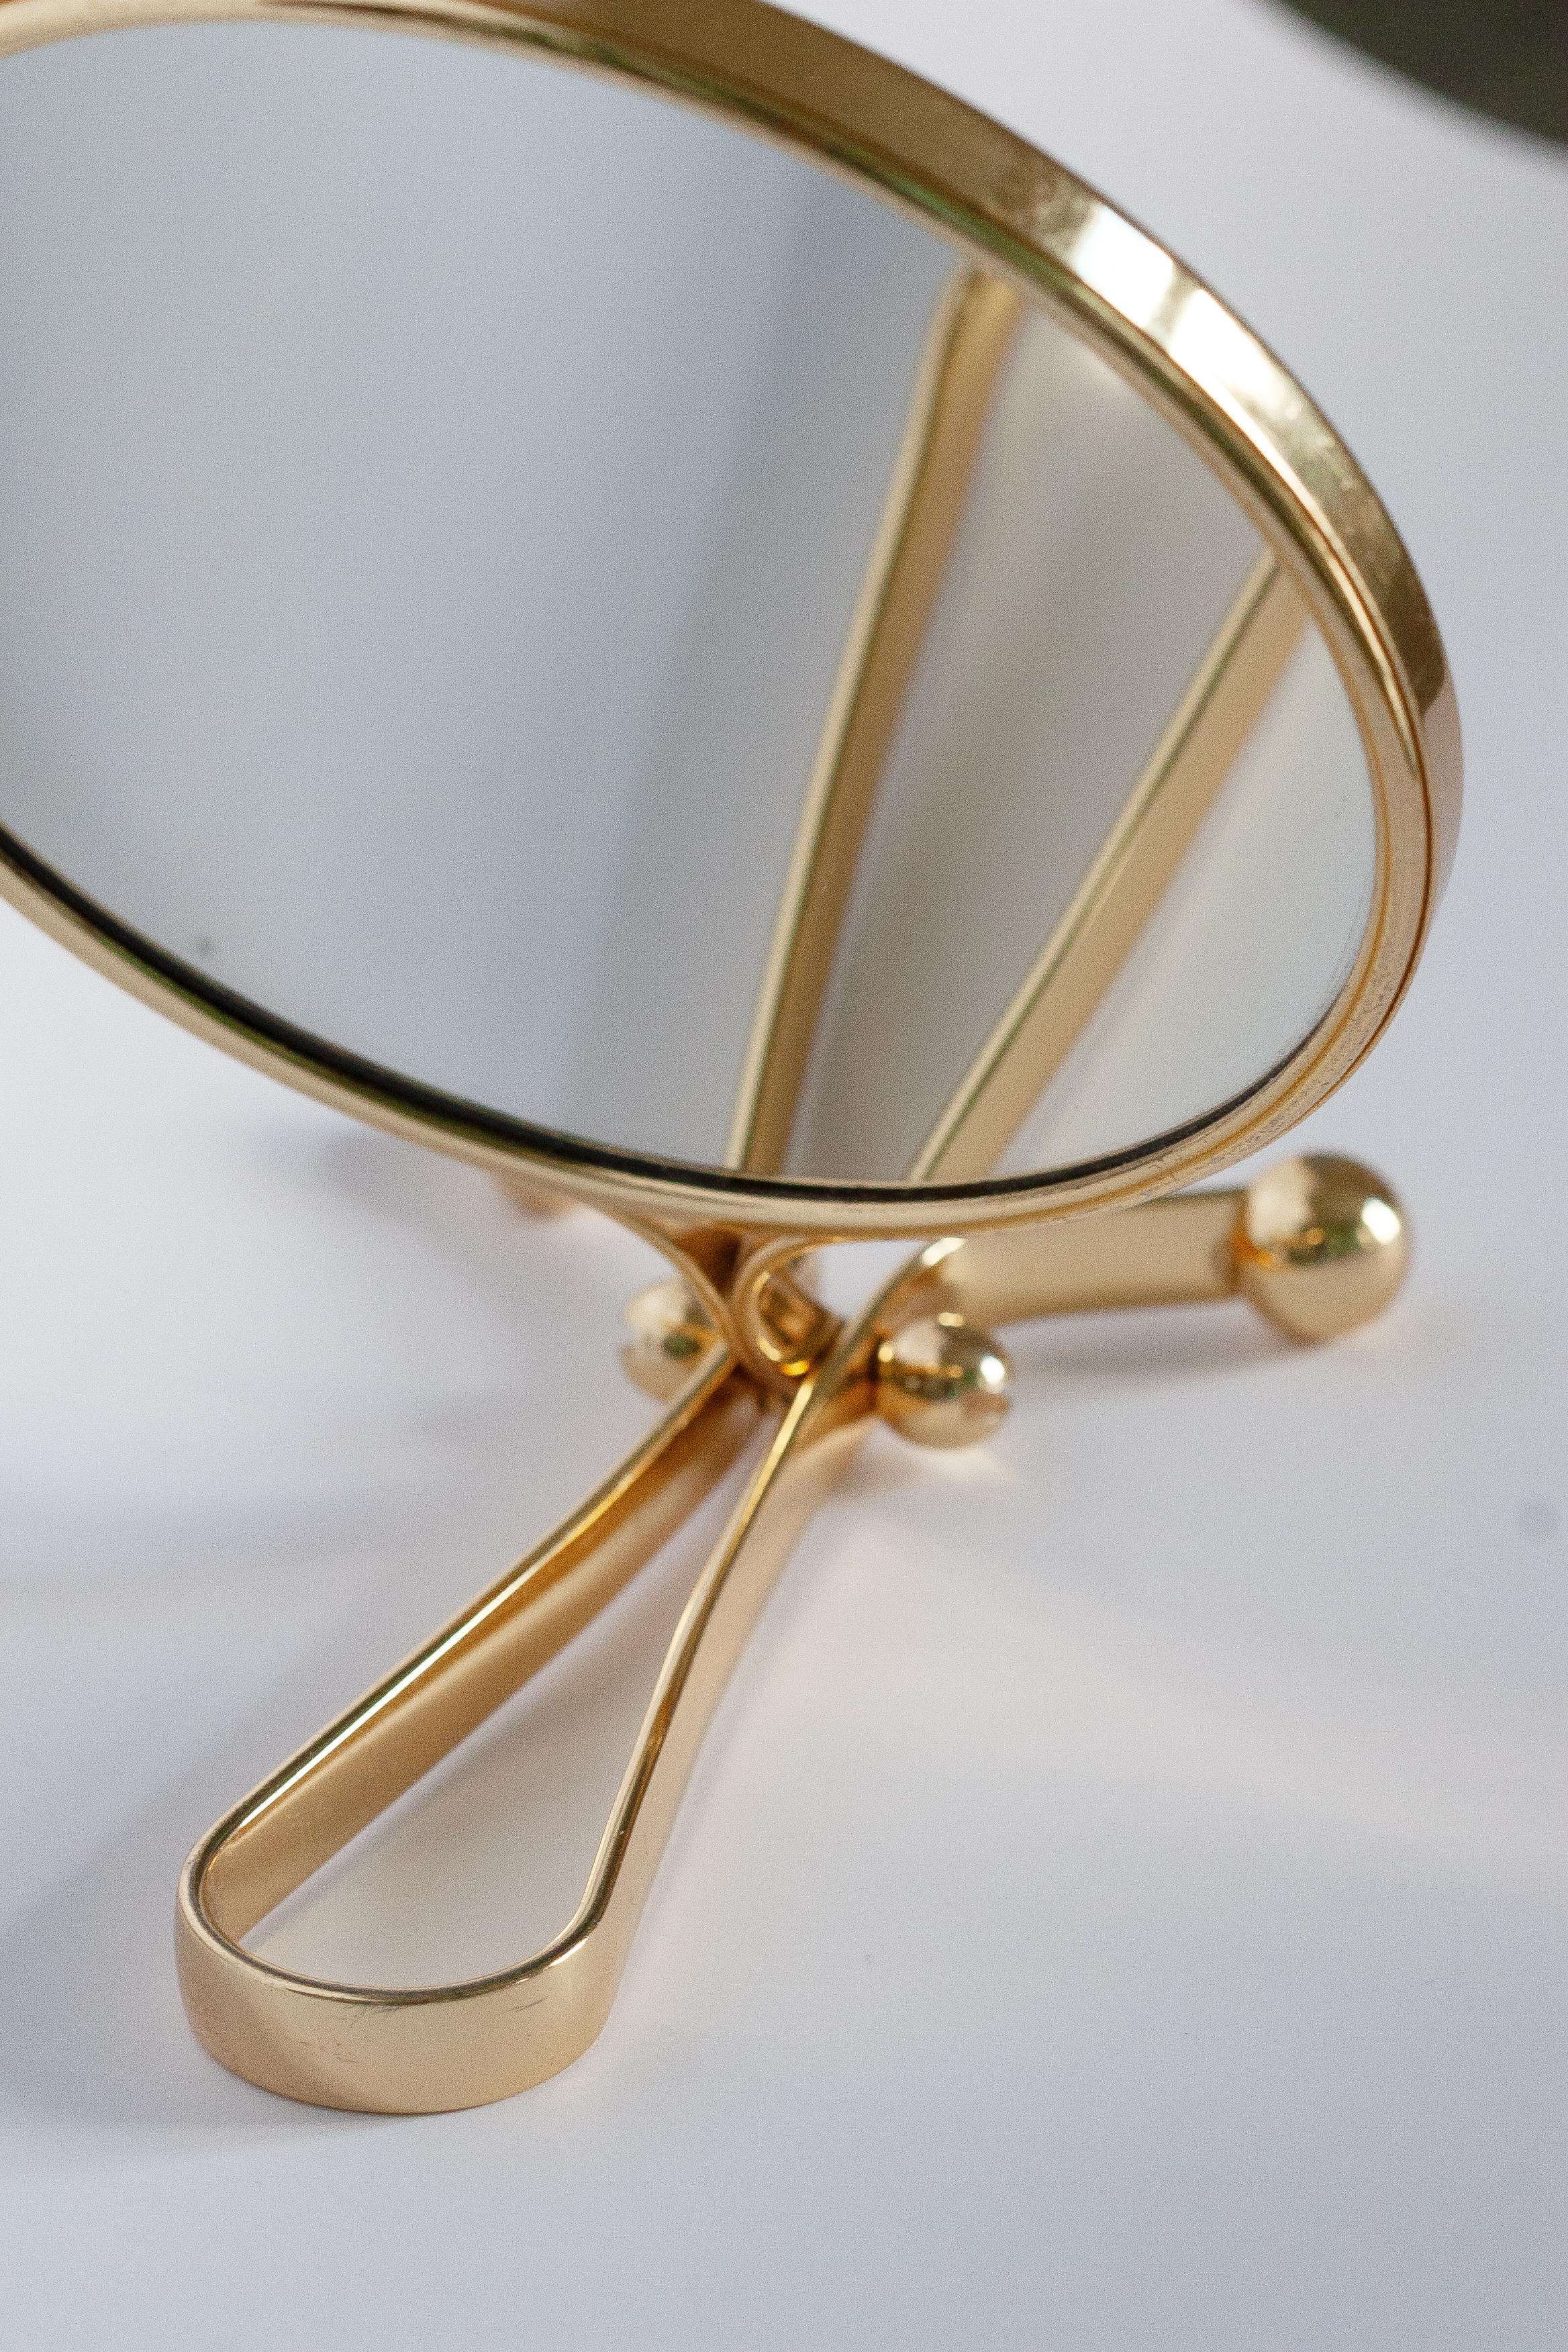 Mid Century Gold Decorative Table Mirror in Metal Frame, Italy, 1960s In Good Condition For Sale In 05-080 Hornowek, PL